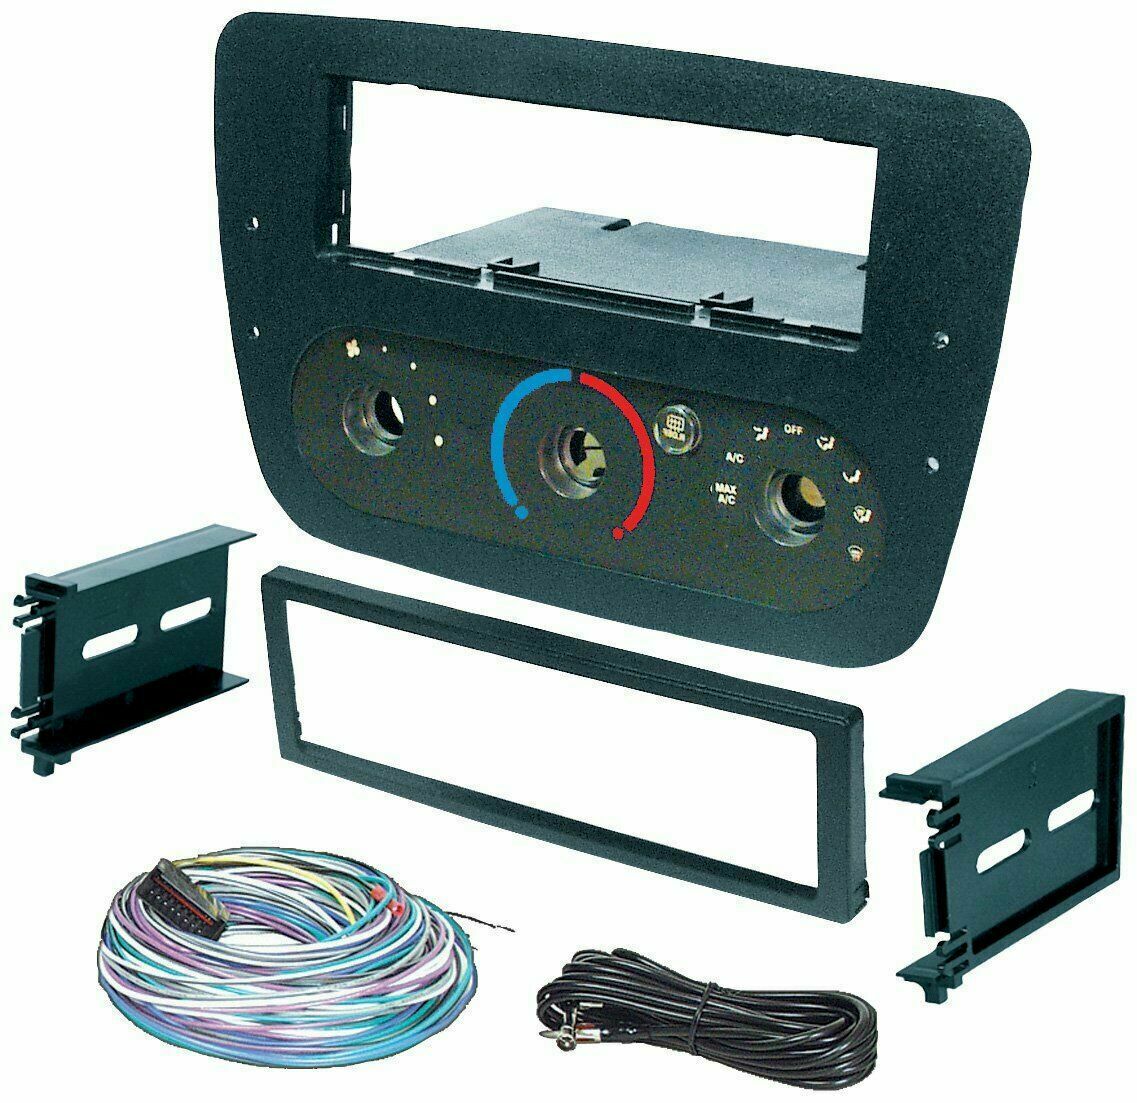 XP Audio X FMK578 Car Installation Dash Kit compatible with 00-up Ford Taurus Mercury Sable